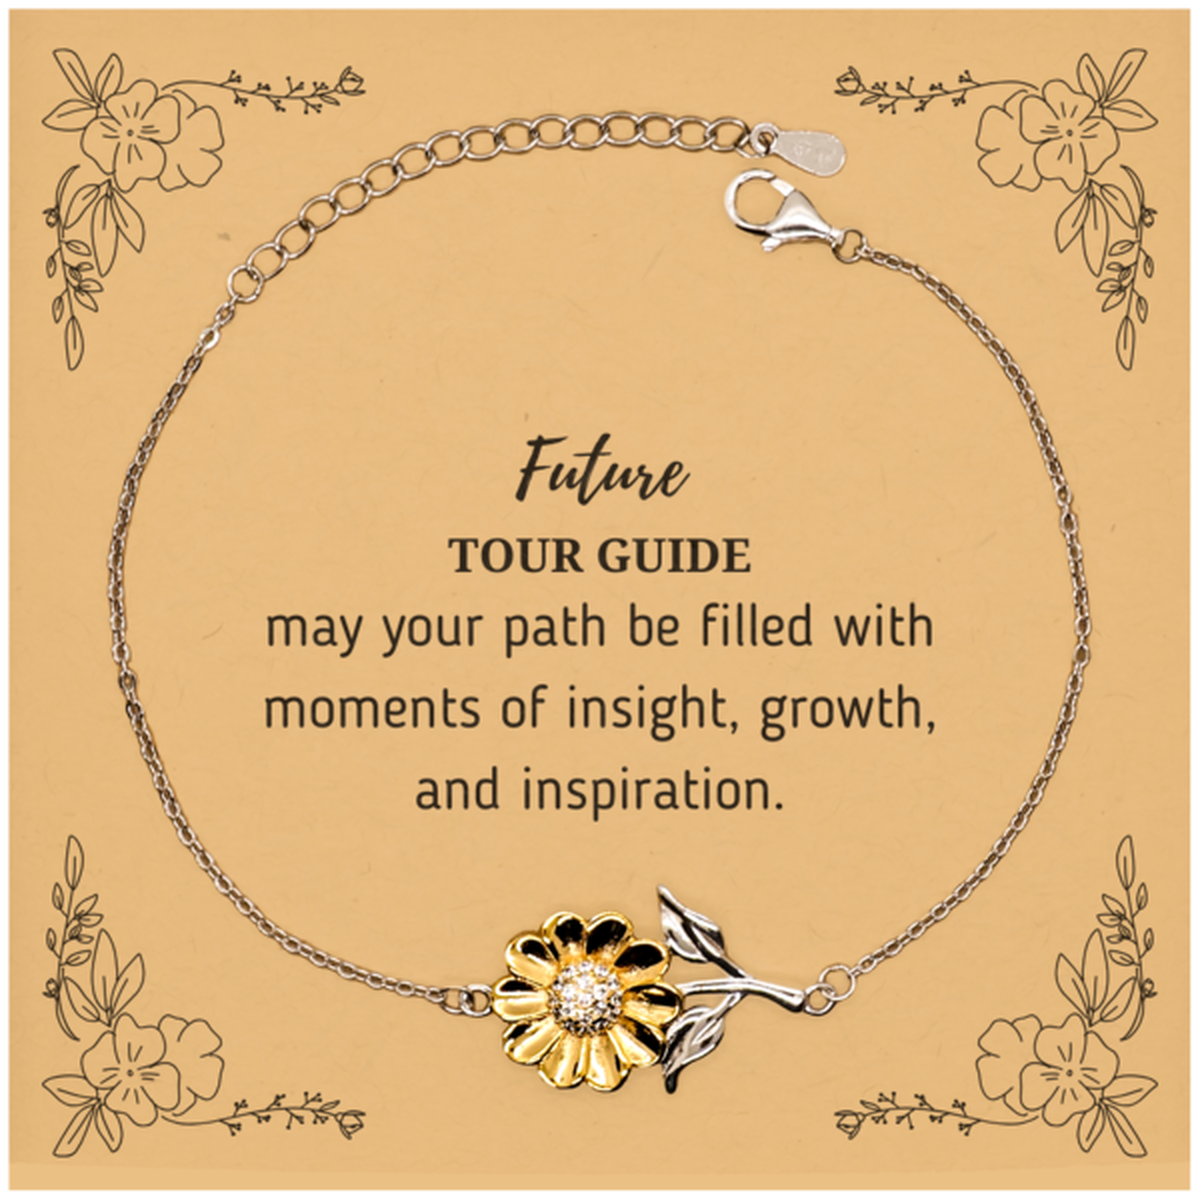 Future Tour Guide Gifts, May your path be filled with moments of insight, Graduation Gifts for New Tour Guide, Christmas Unique Sunflower Bracelet For Men, Women, Friends